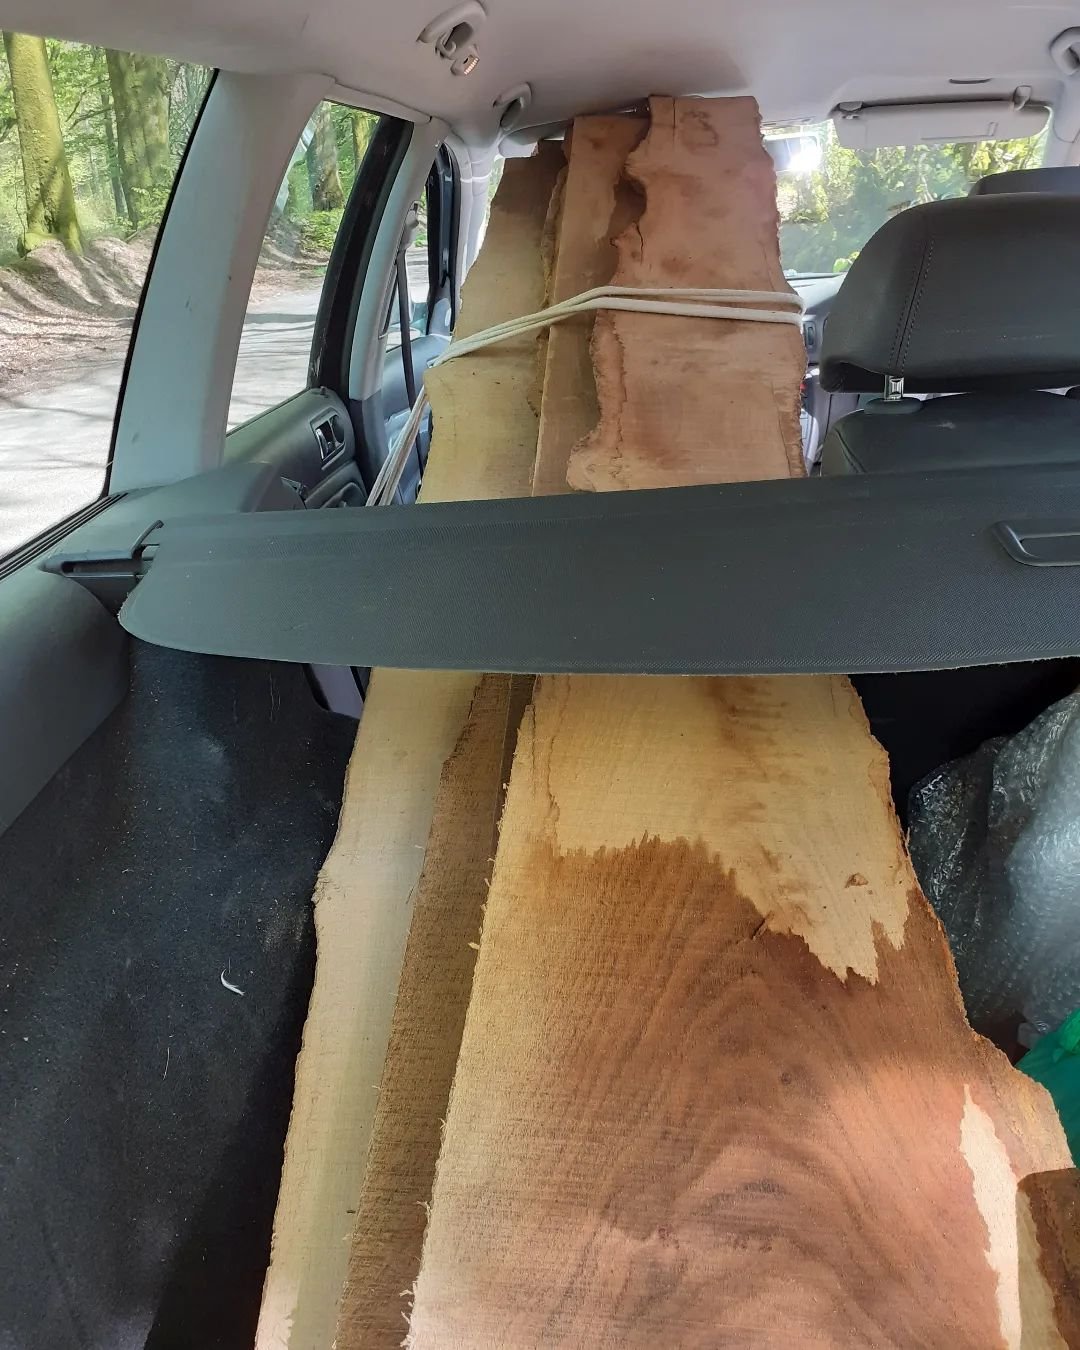 Fresh cut planks on their way to the studio. Thanks to @heydonwood for providing! This is how my carvings and woodcuts start their journey,  on natural wood planks with their waney edges.
#naturalwood